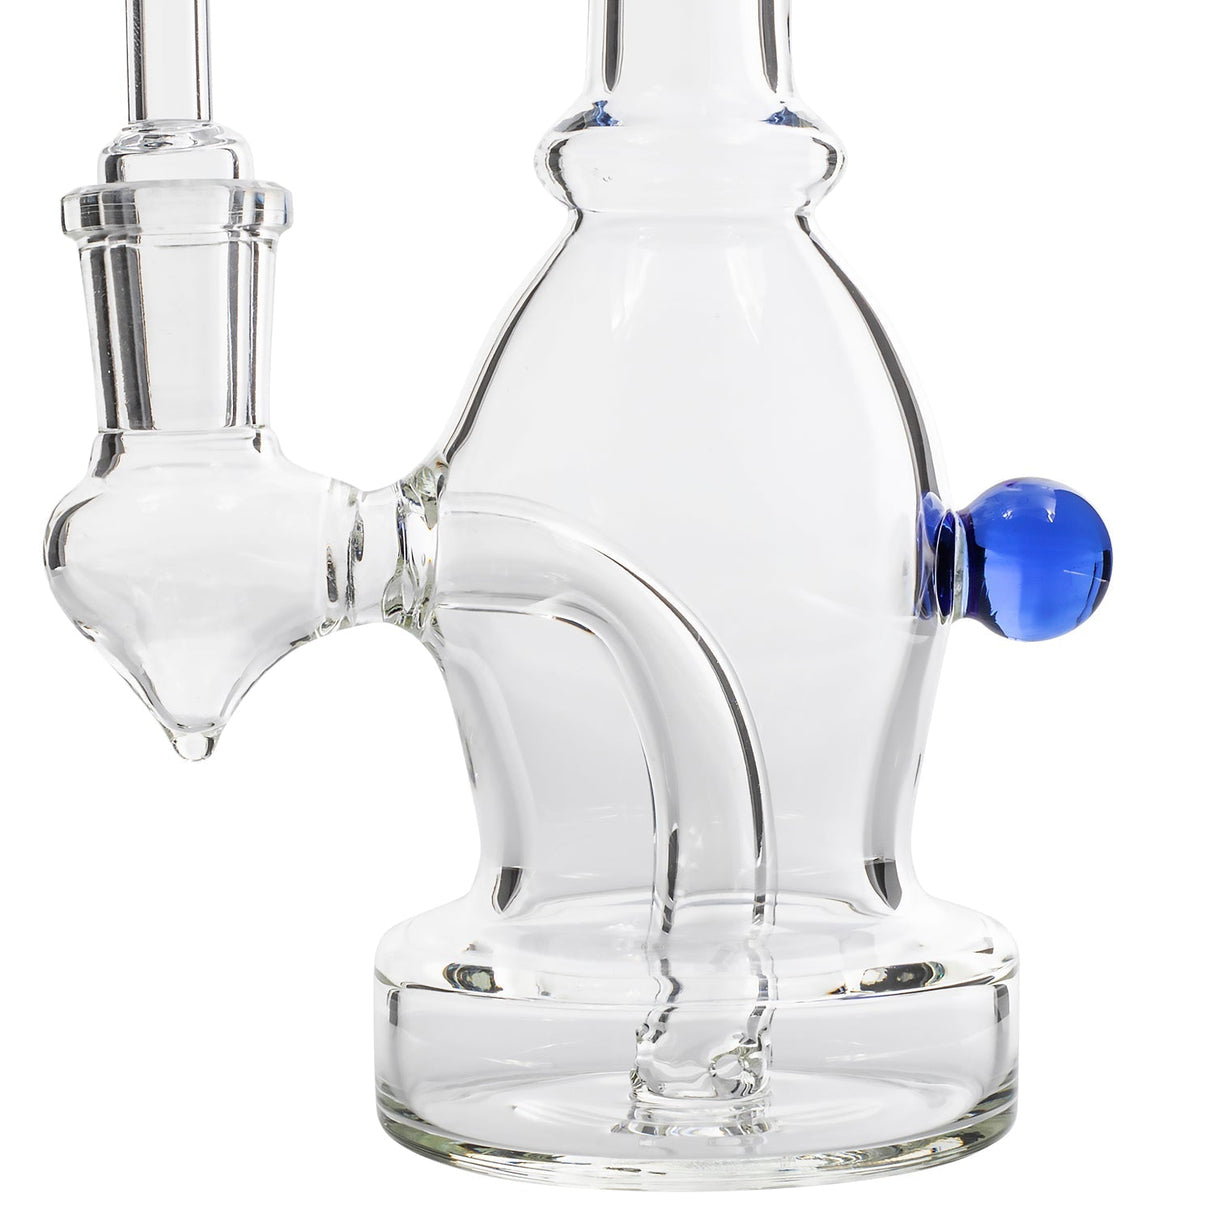 Glassic Curved Body Dab Rig with Blue Accents and Banger Hanger Design - Close-up Side View